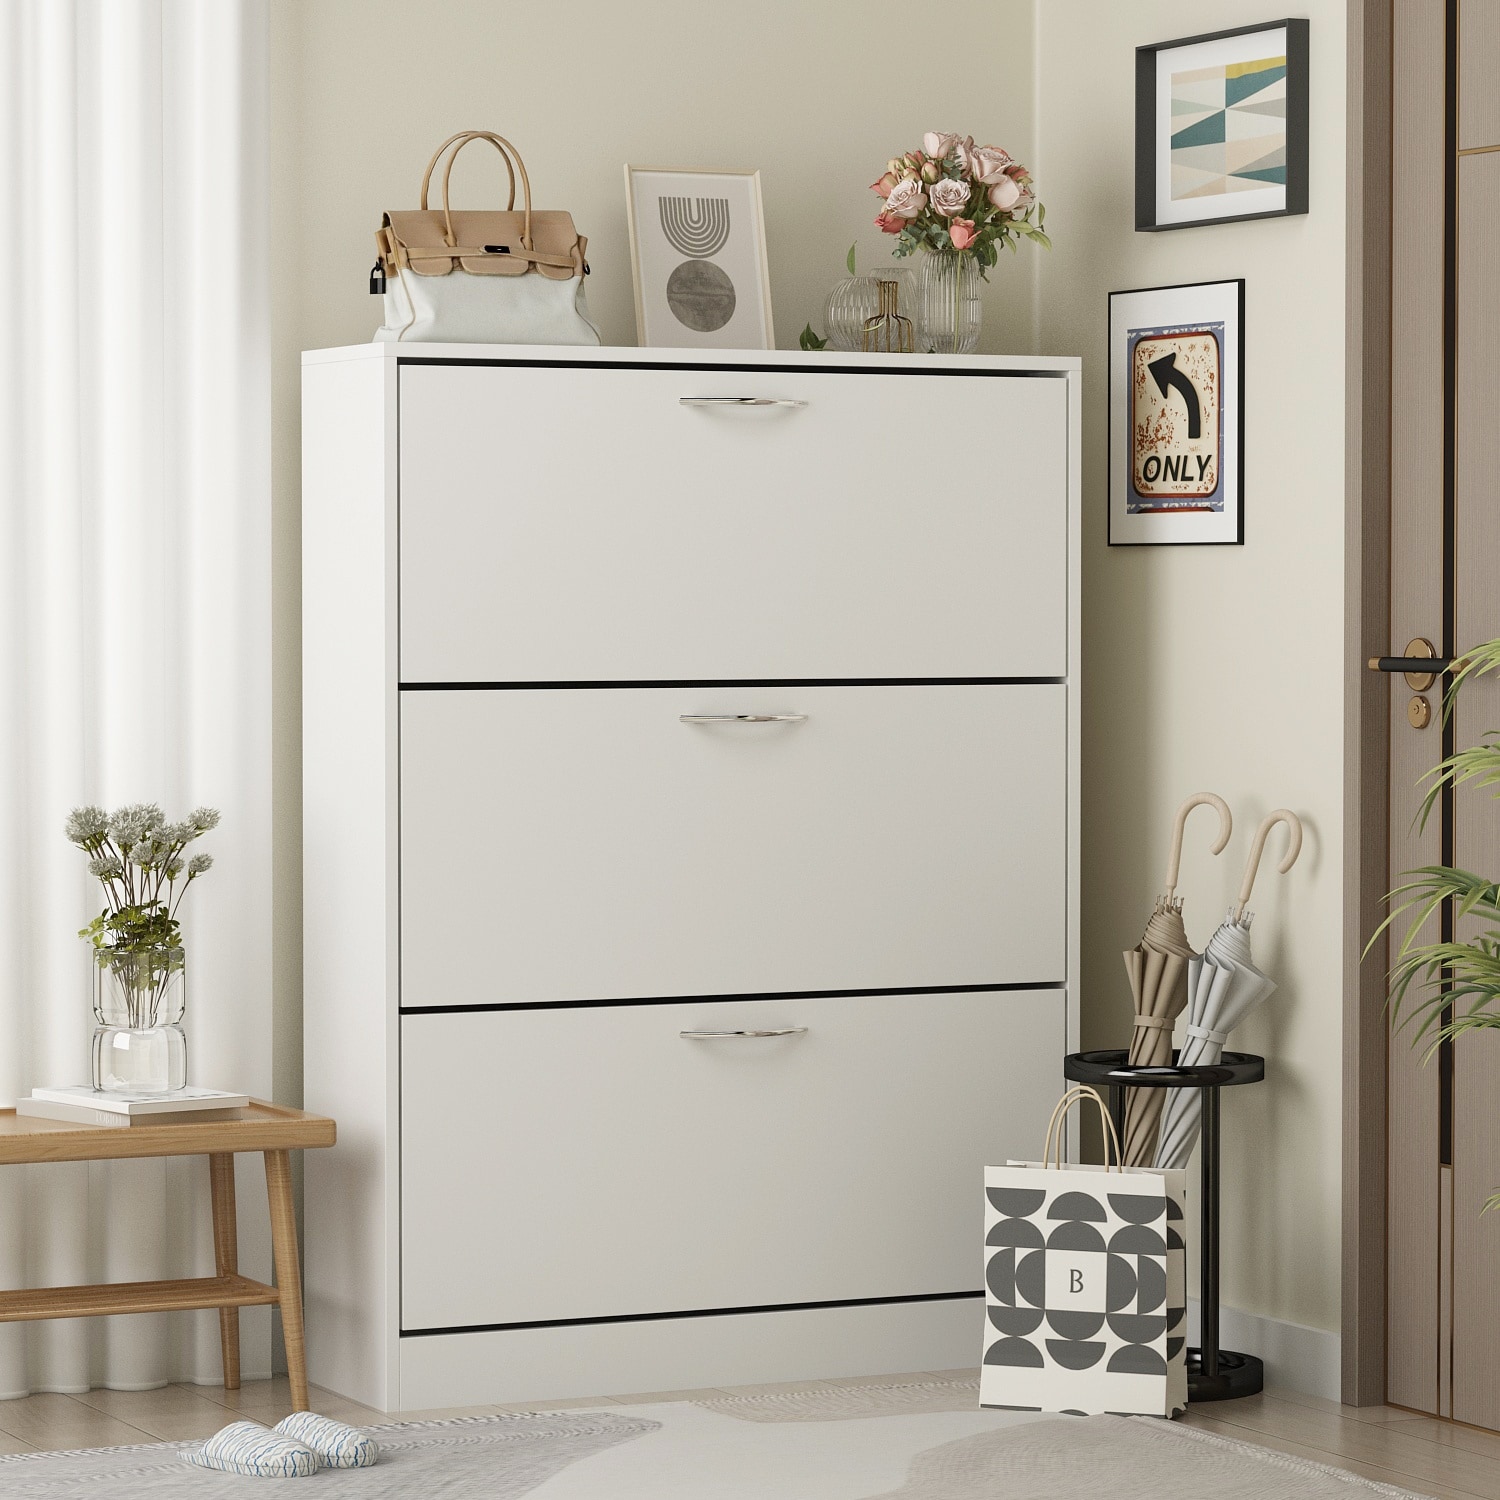 https://ak1.ostkcdn.com/images/products/is/images/direct/bc5d1d172fdb0c32d5e51185e5b6dfd2979c21e6/Home-Modern-3-Drawer-Shoe-Cabinet-3-Tier-Shoe-Rack-Storage-Organizer.jpg